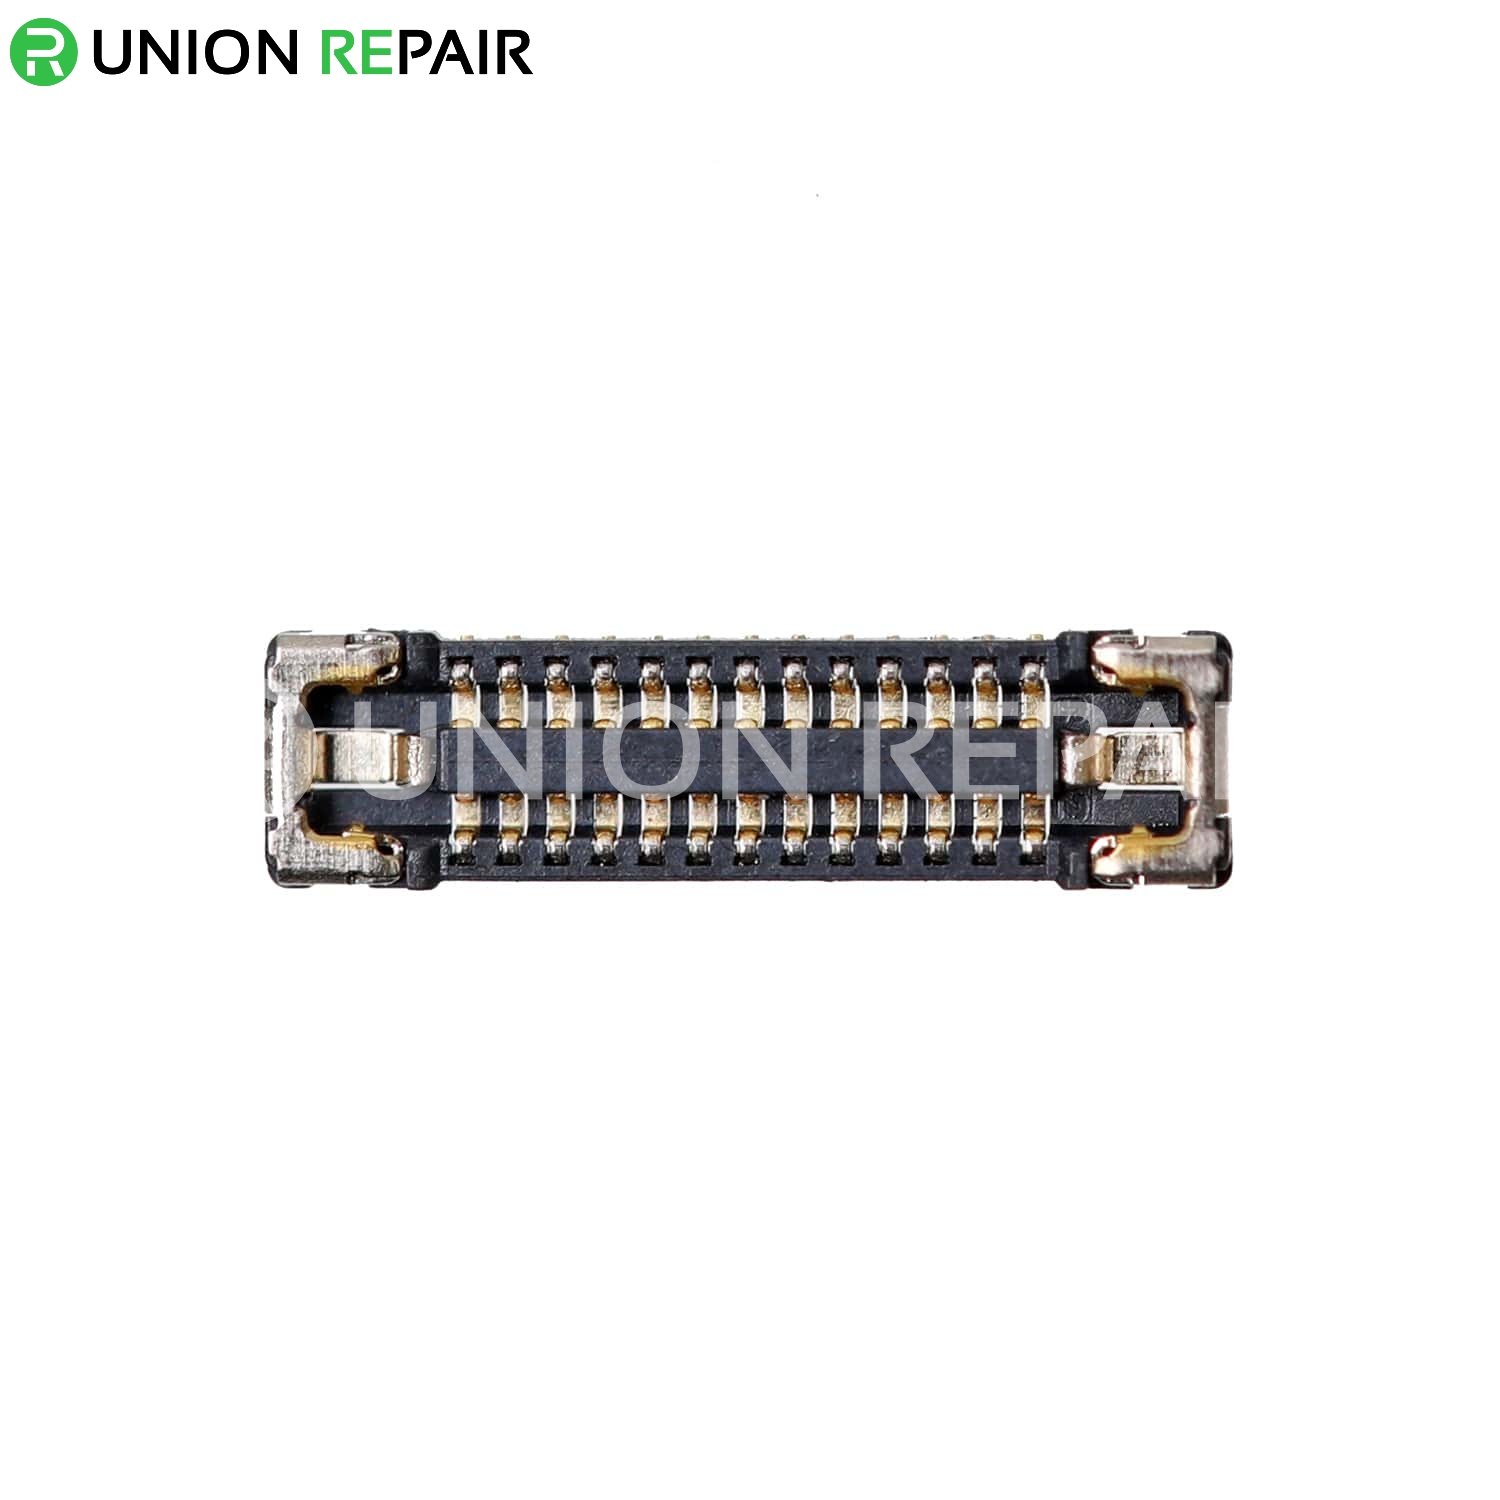 Replacement for iPhone XS MAX Rear Camera Connector Port Onboard